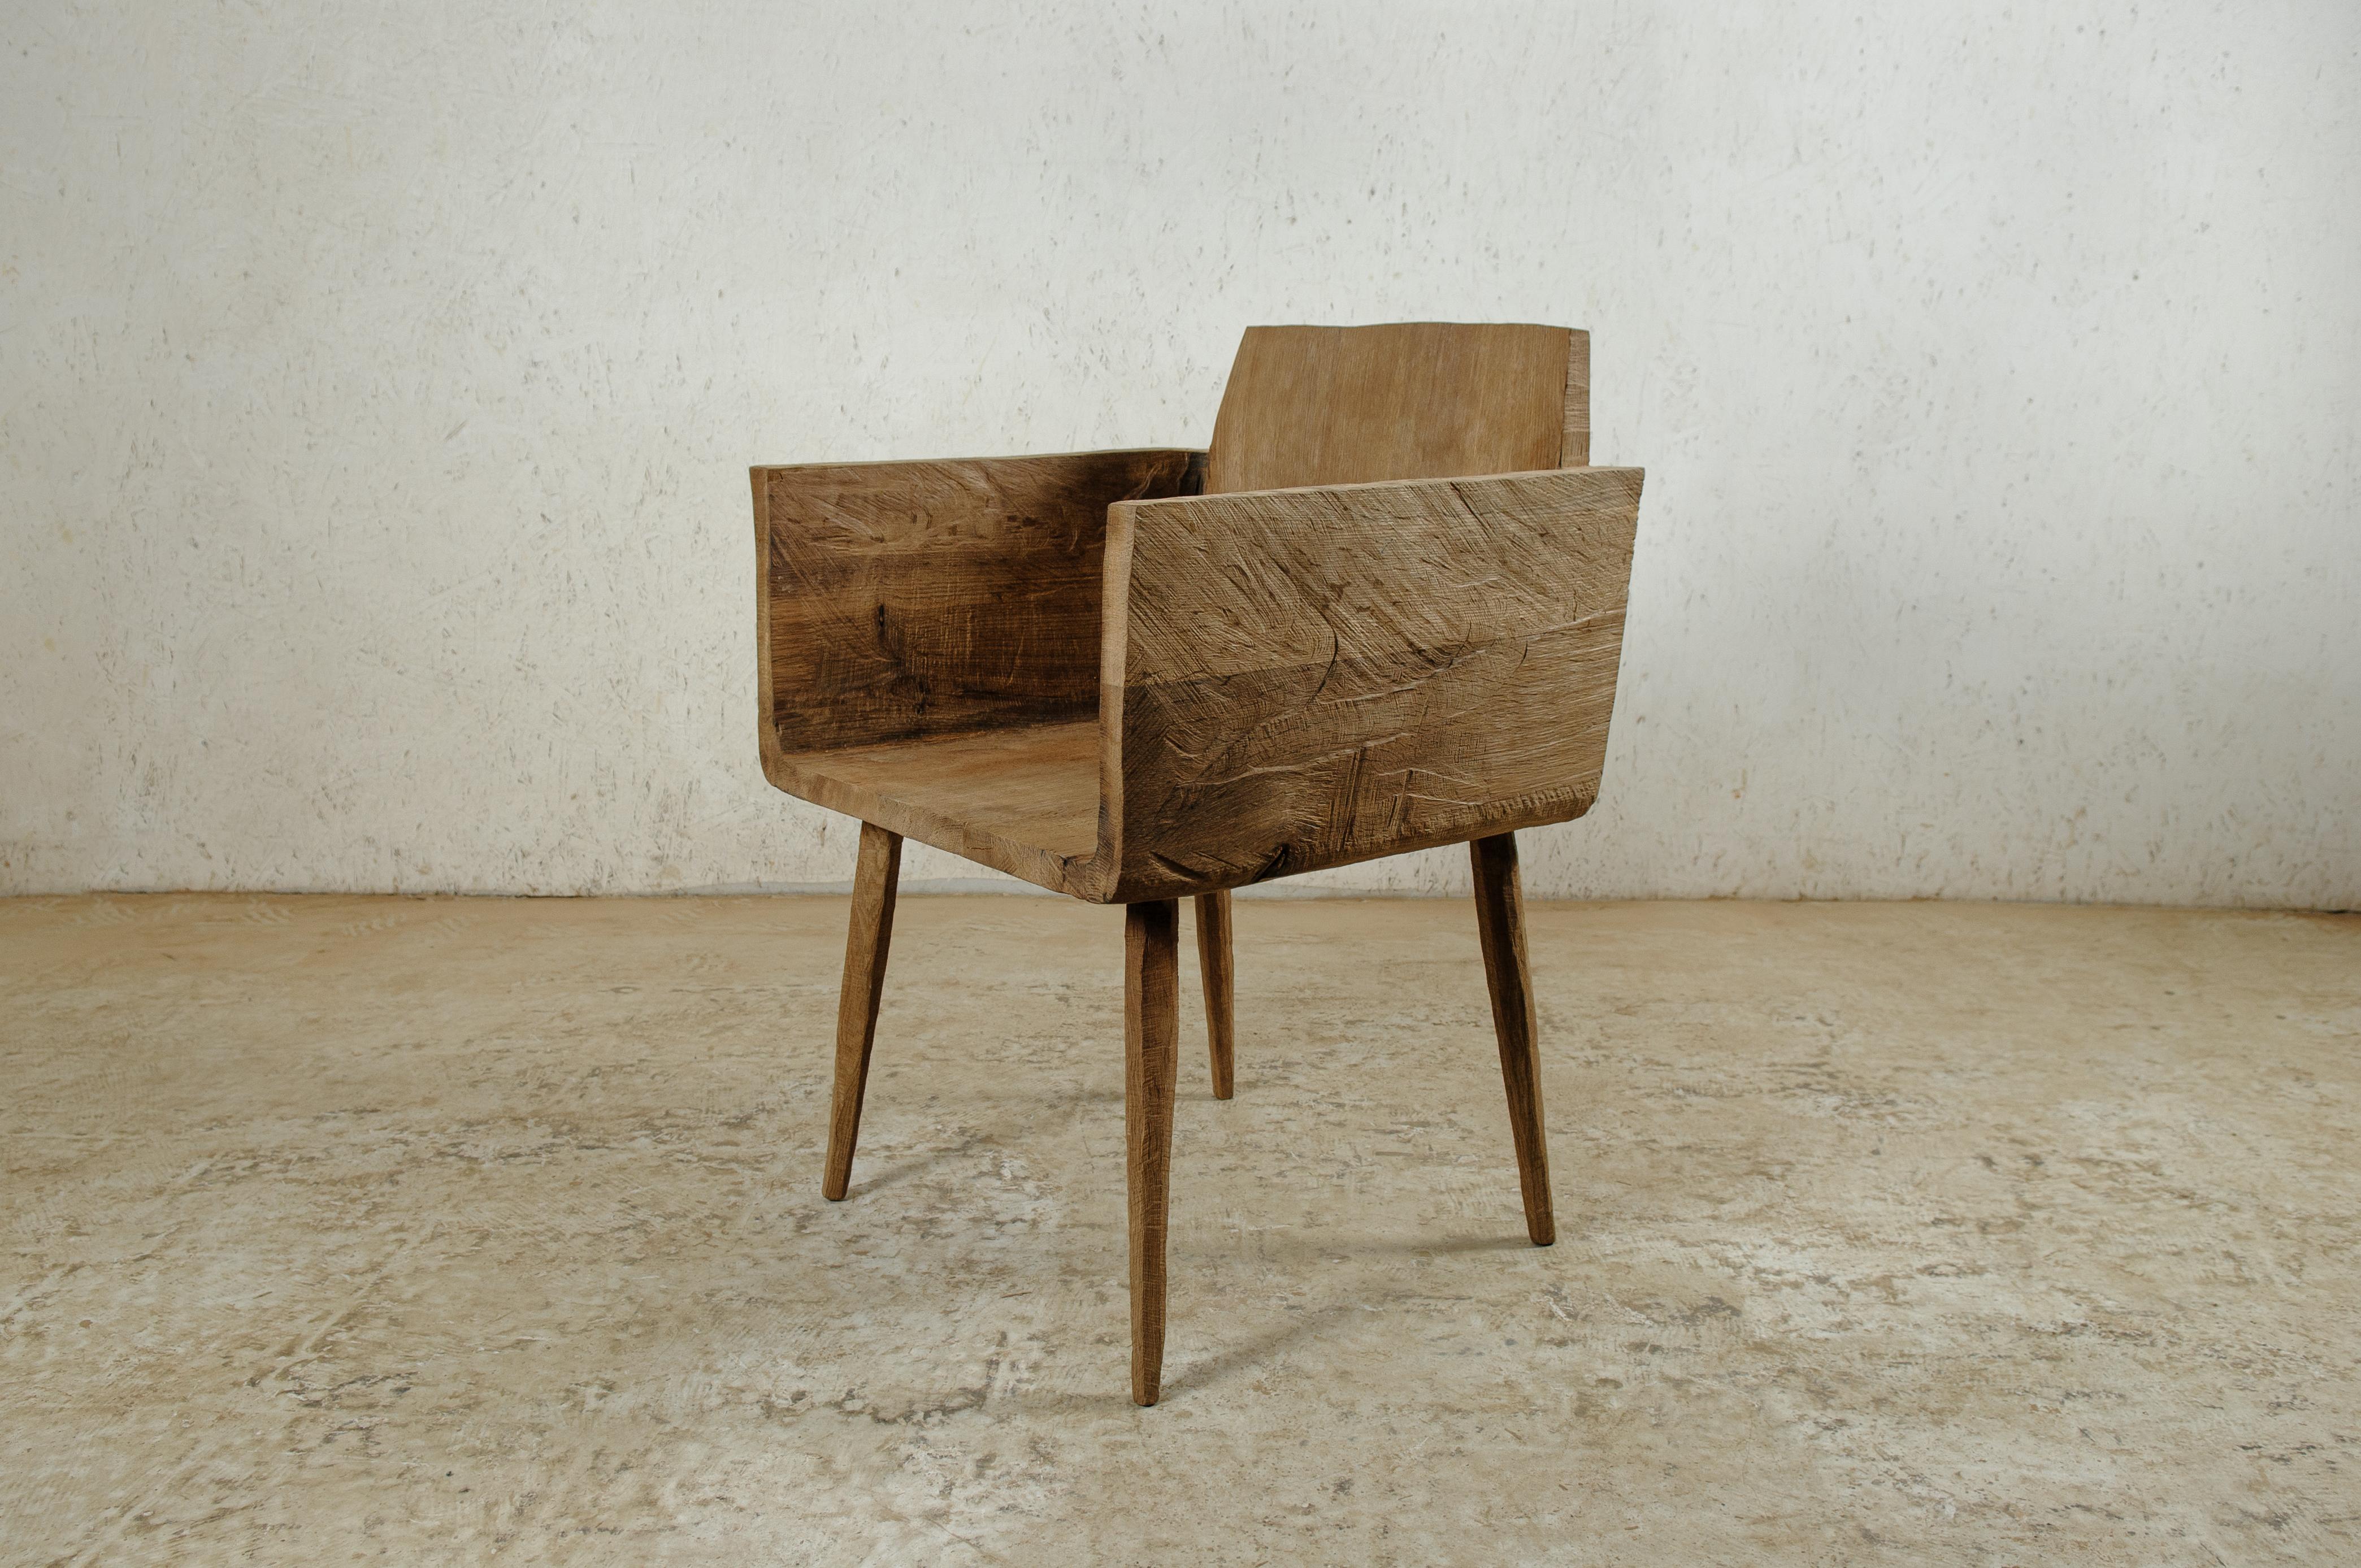 Armchair made of solid oak (+ linseed oil) 
(Outdoor use OK)

Dimensions : H. 82 x 48 x 48 cm (SH. 45 cm)
Customizable 

Founded by artist Denis Milovanov, SÓHA design studio conceives and produces furniture design and decorative objects in solid